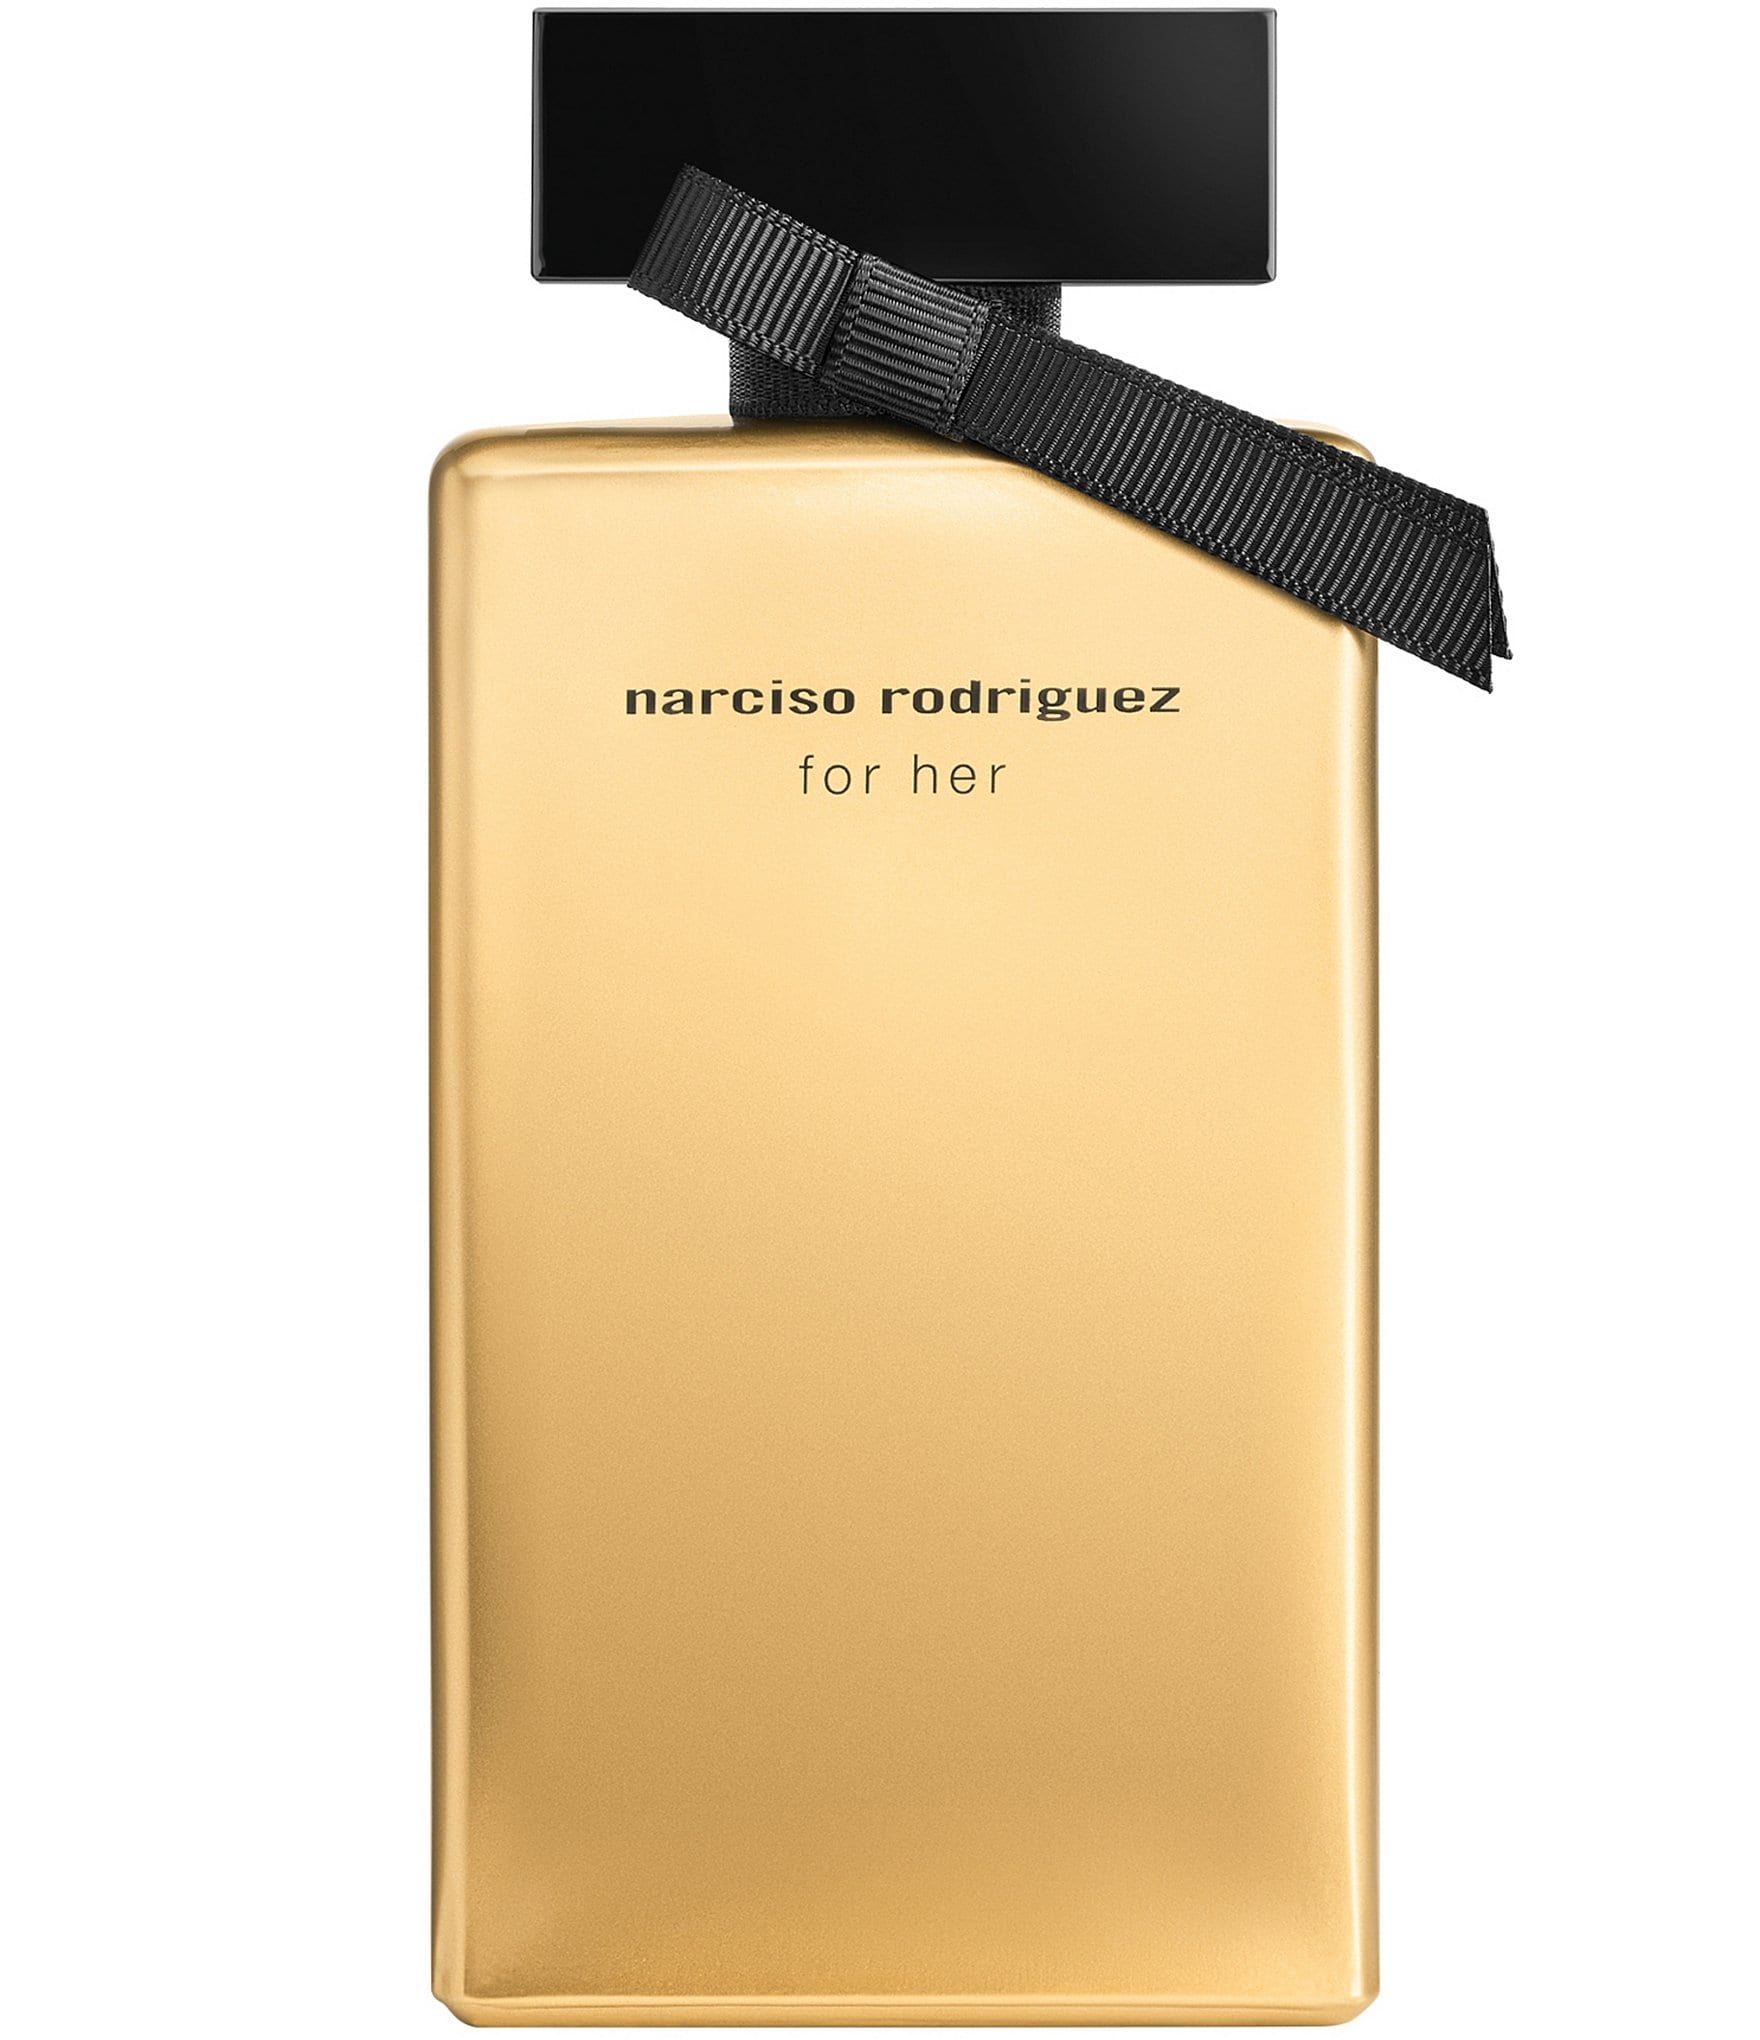 Shop It Now: Narciso Rodriguez for Kohl's Launches One Day Early - The  Budget Babe